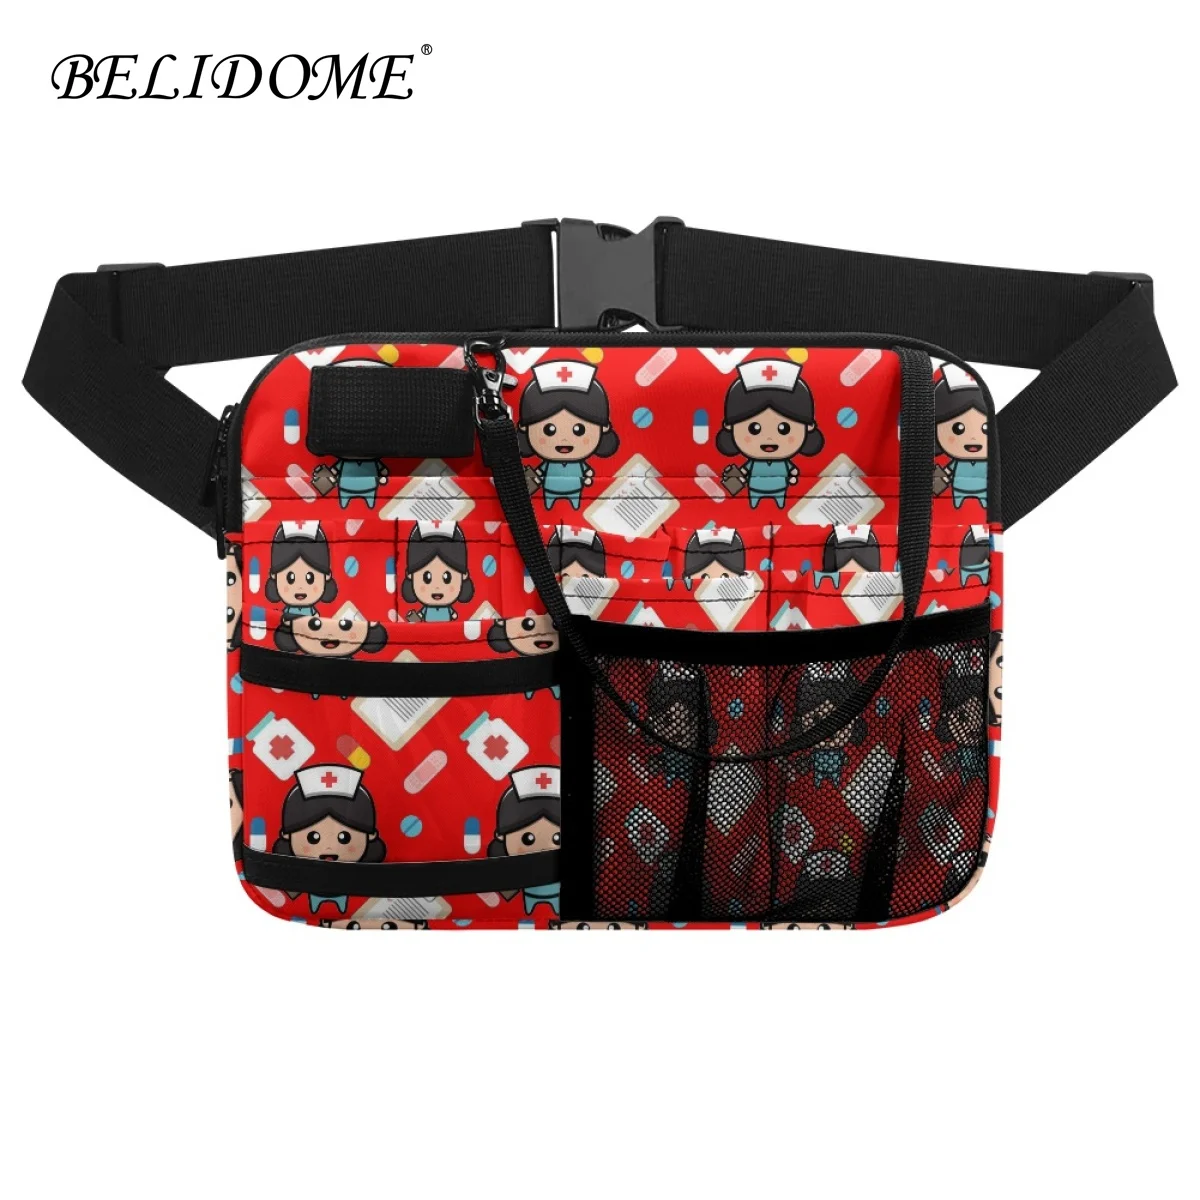 

New Nurse Fanny Pack with Tape Holder Multi Compartment Medical Gear Pocket Belt Bag Nursing Organizer Pouch Utility Waist Pack